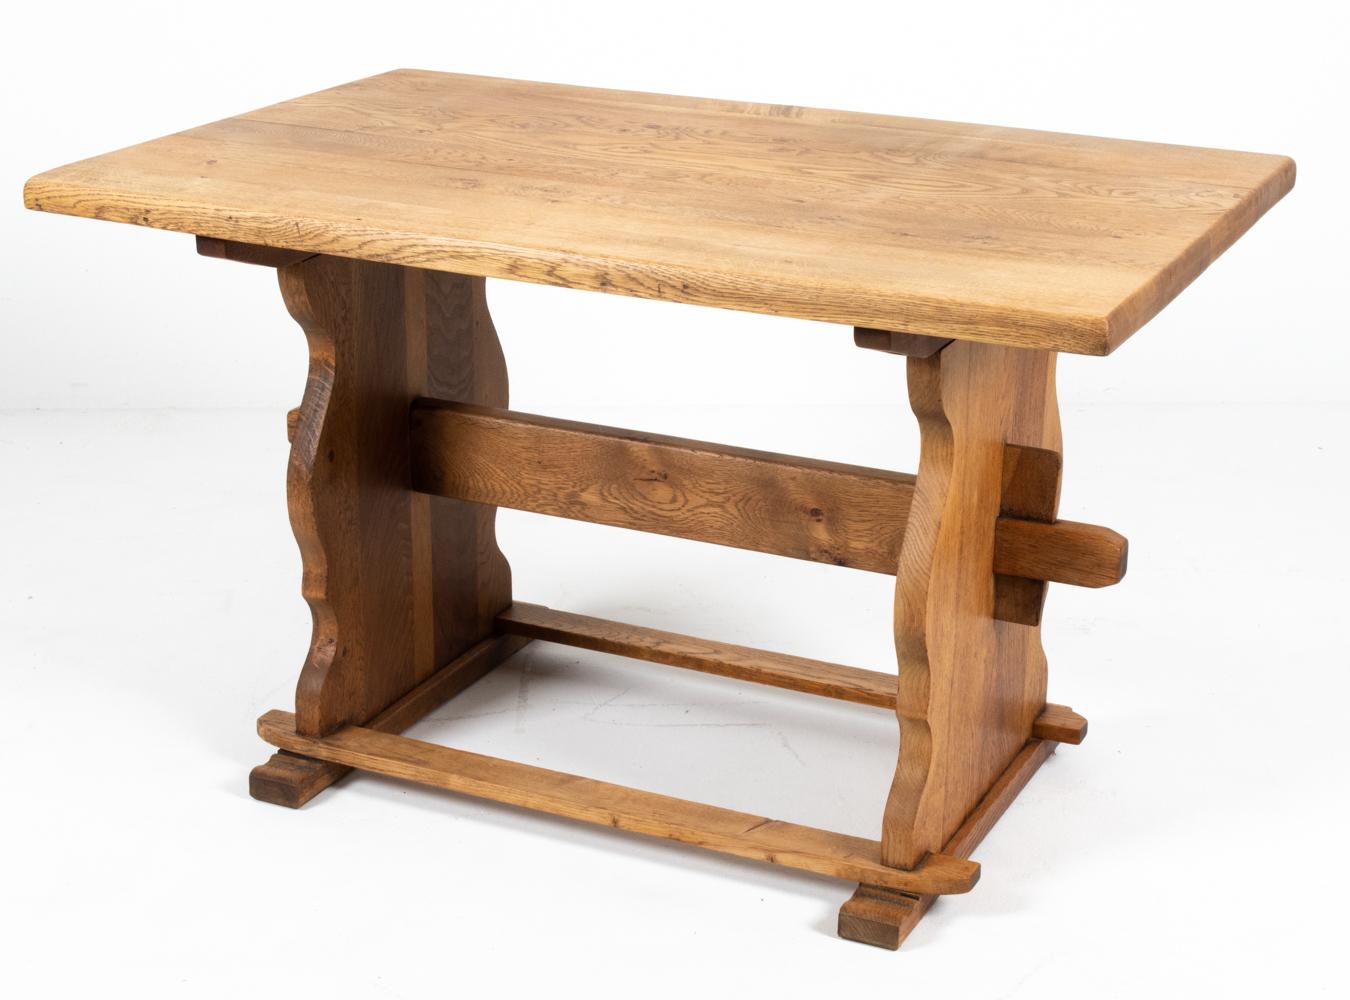 This charming Danish mid-20th century dining table in carved oak wood is a fabulous example of Scandinavian provincial design. Full of farmhouse flair, this trestle base table features a sturdy design with a sculpturally carved base and thick